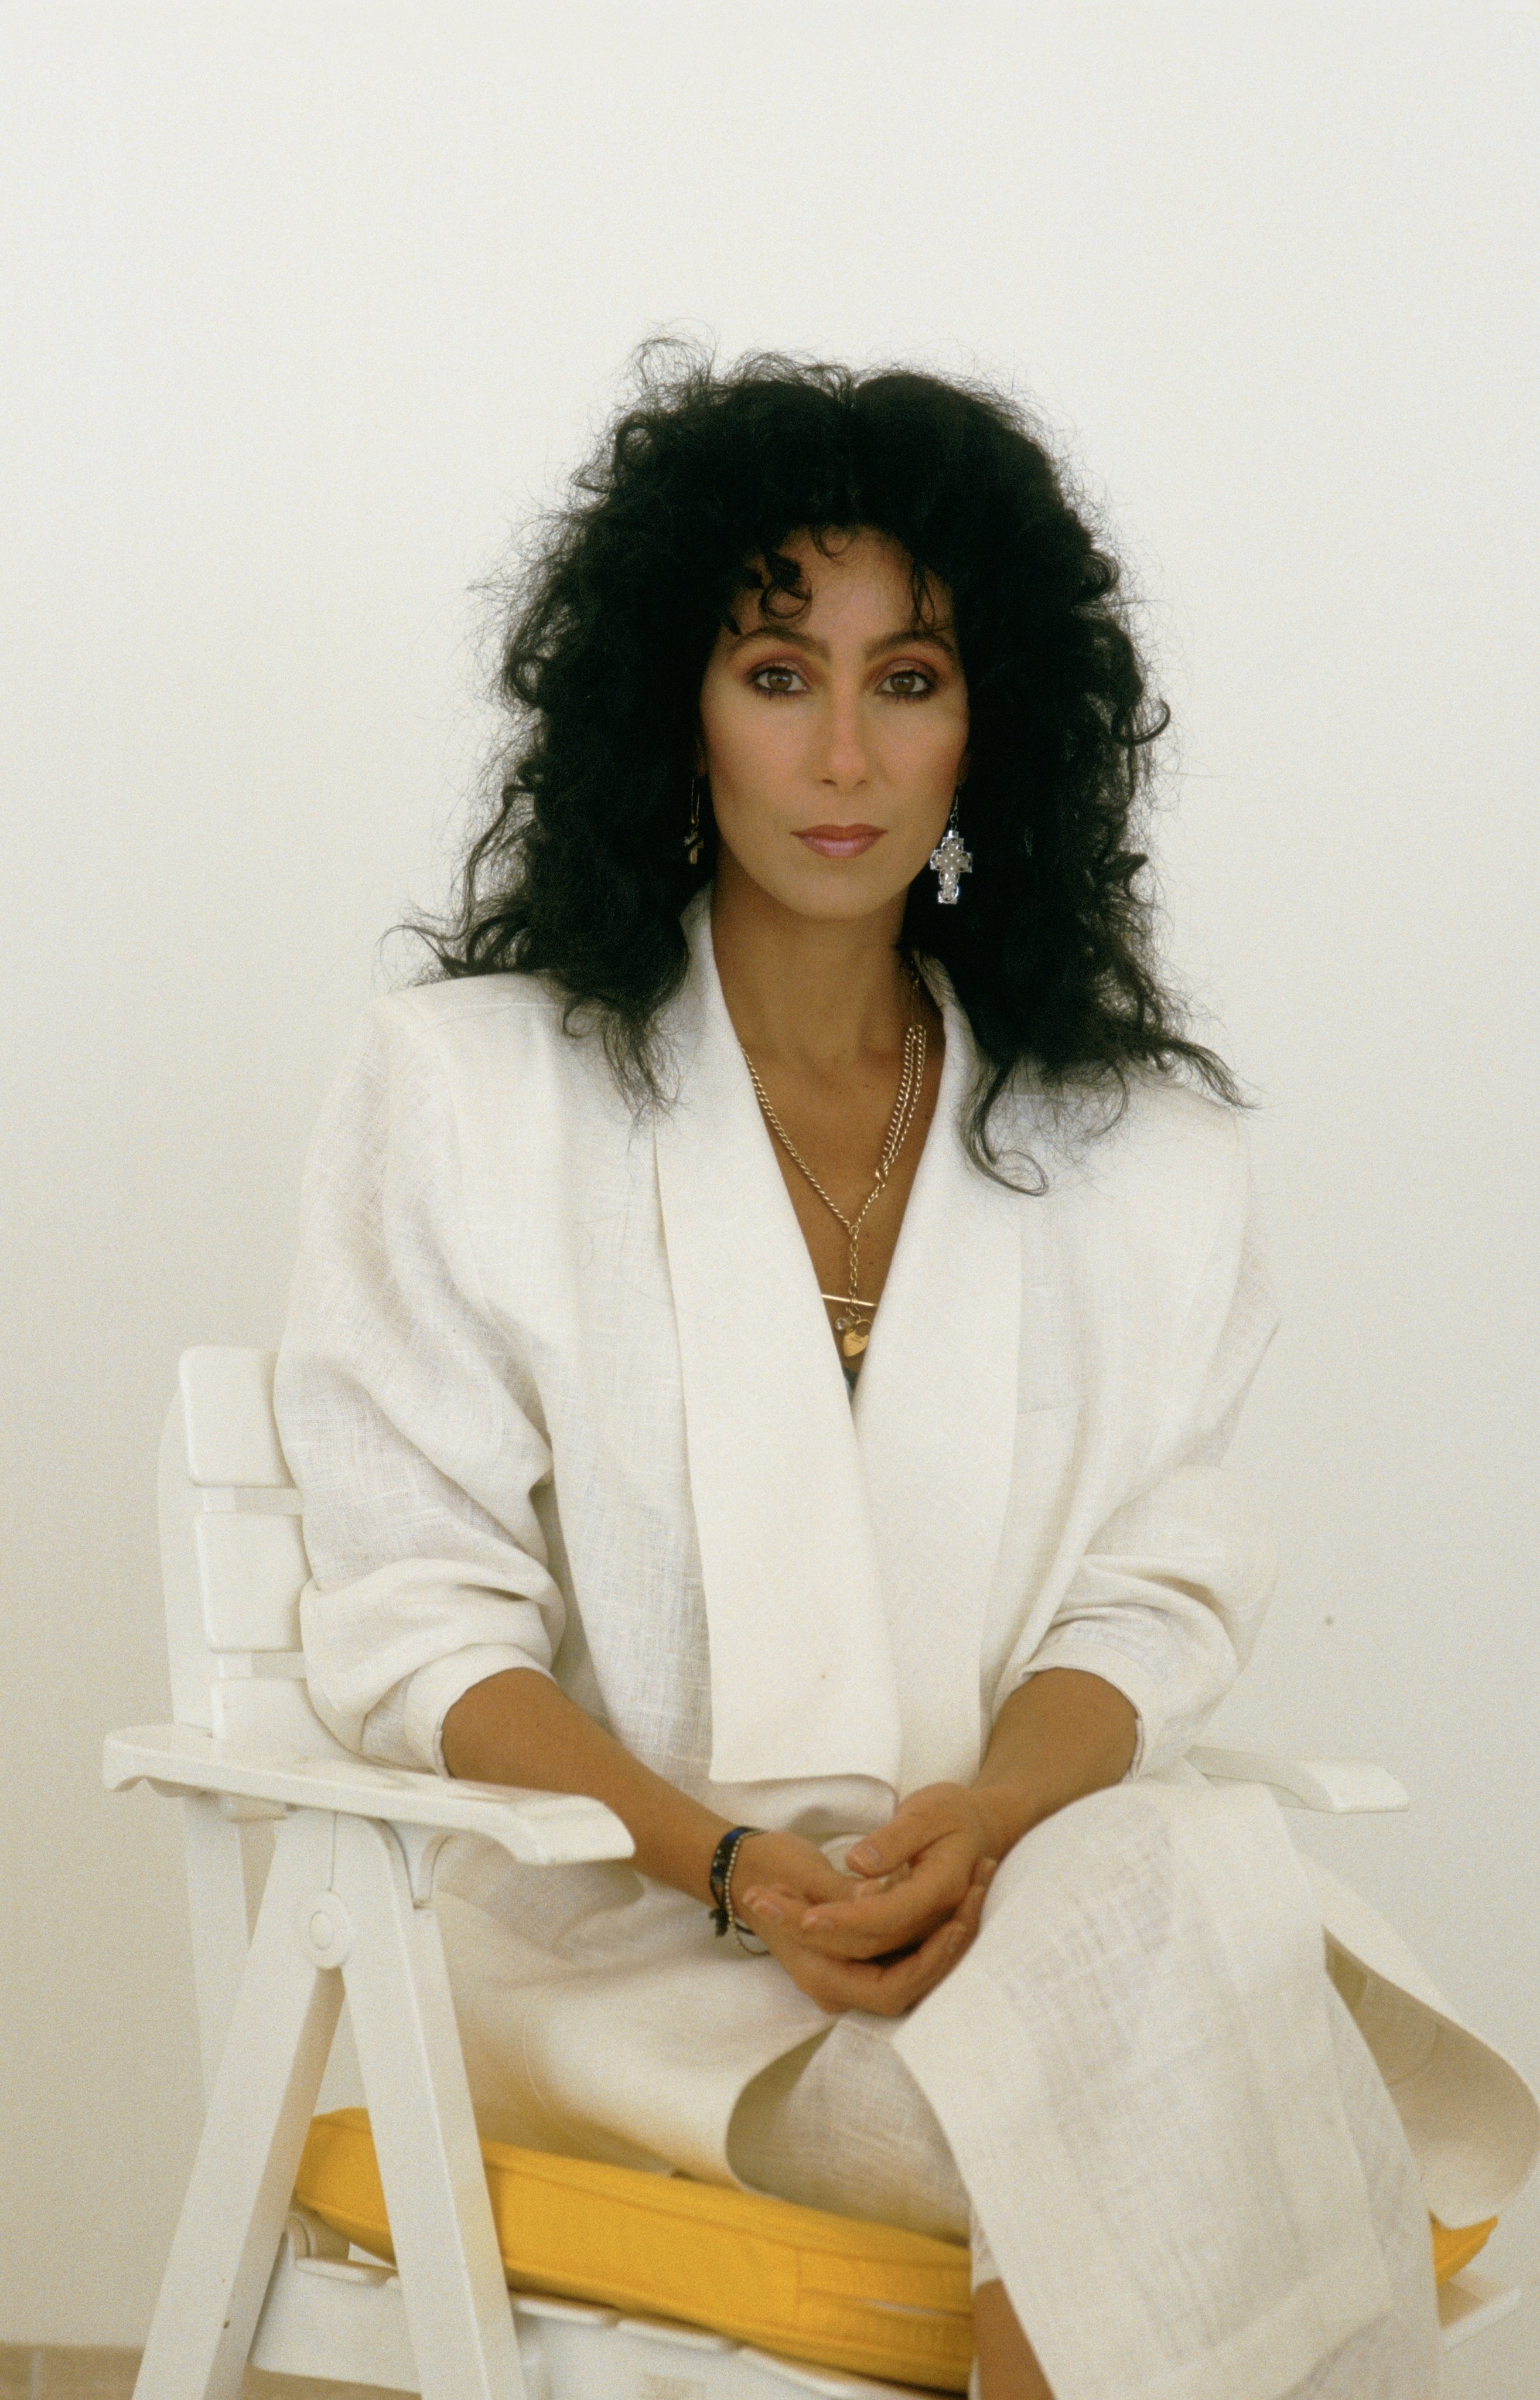 1985: Cher at Cannes Film Festival